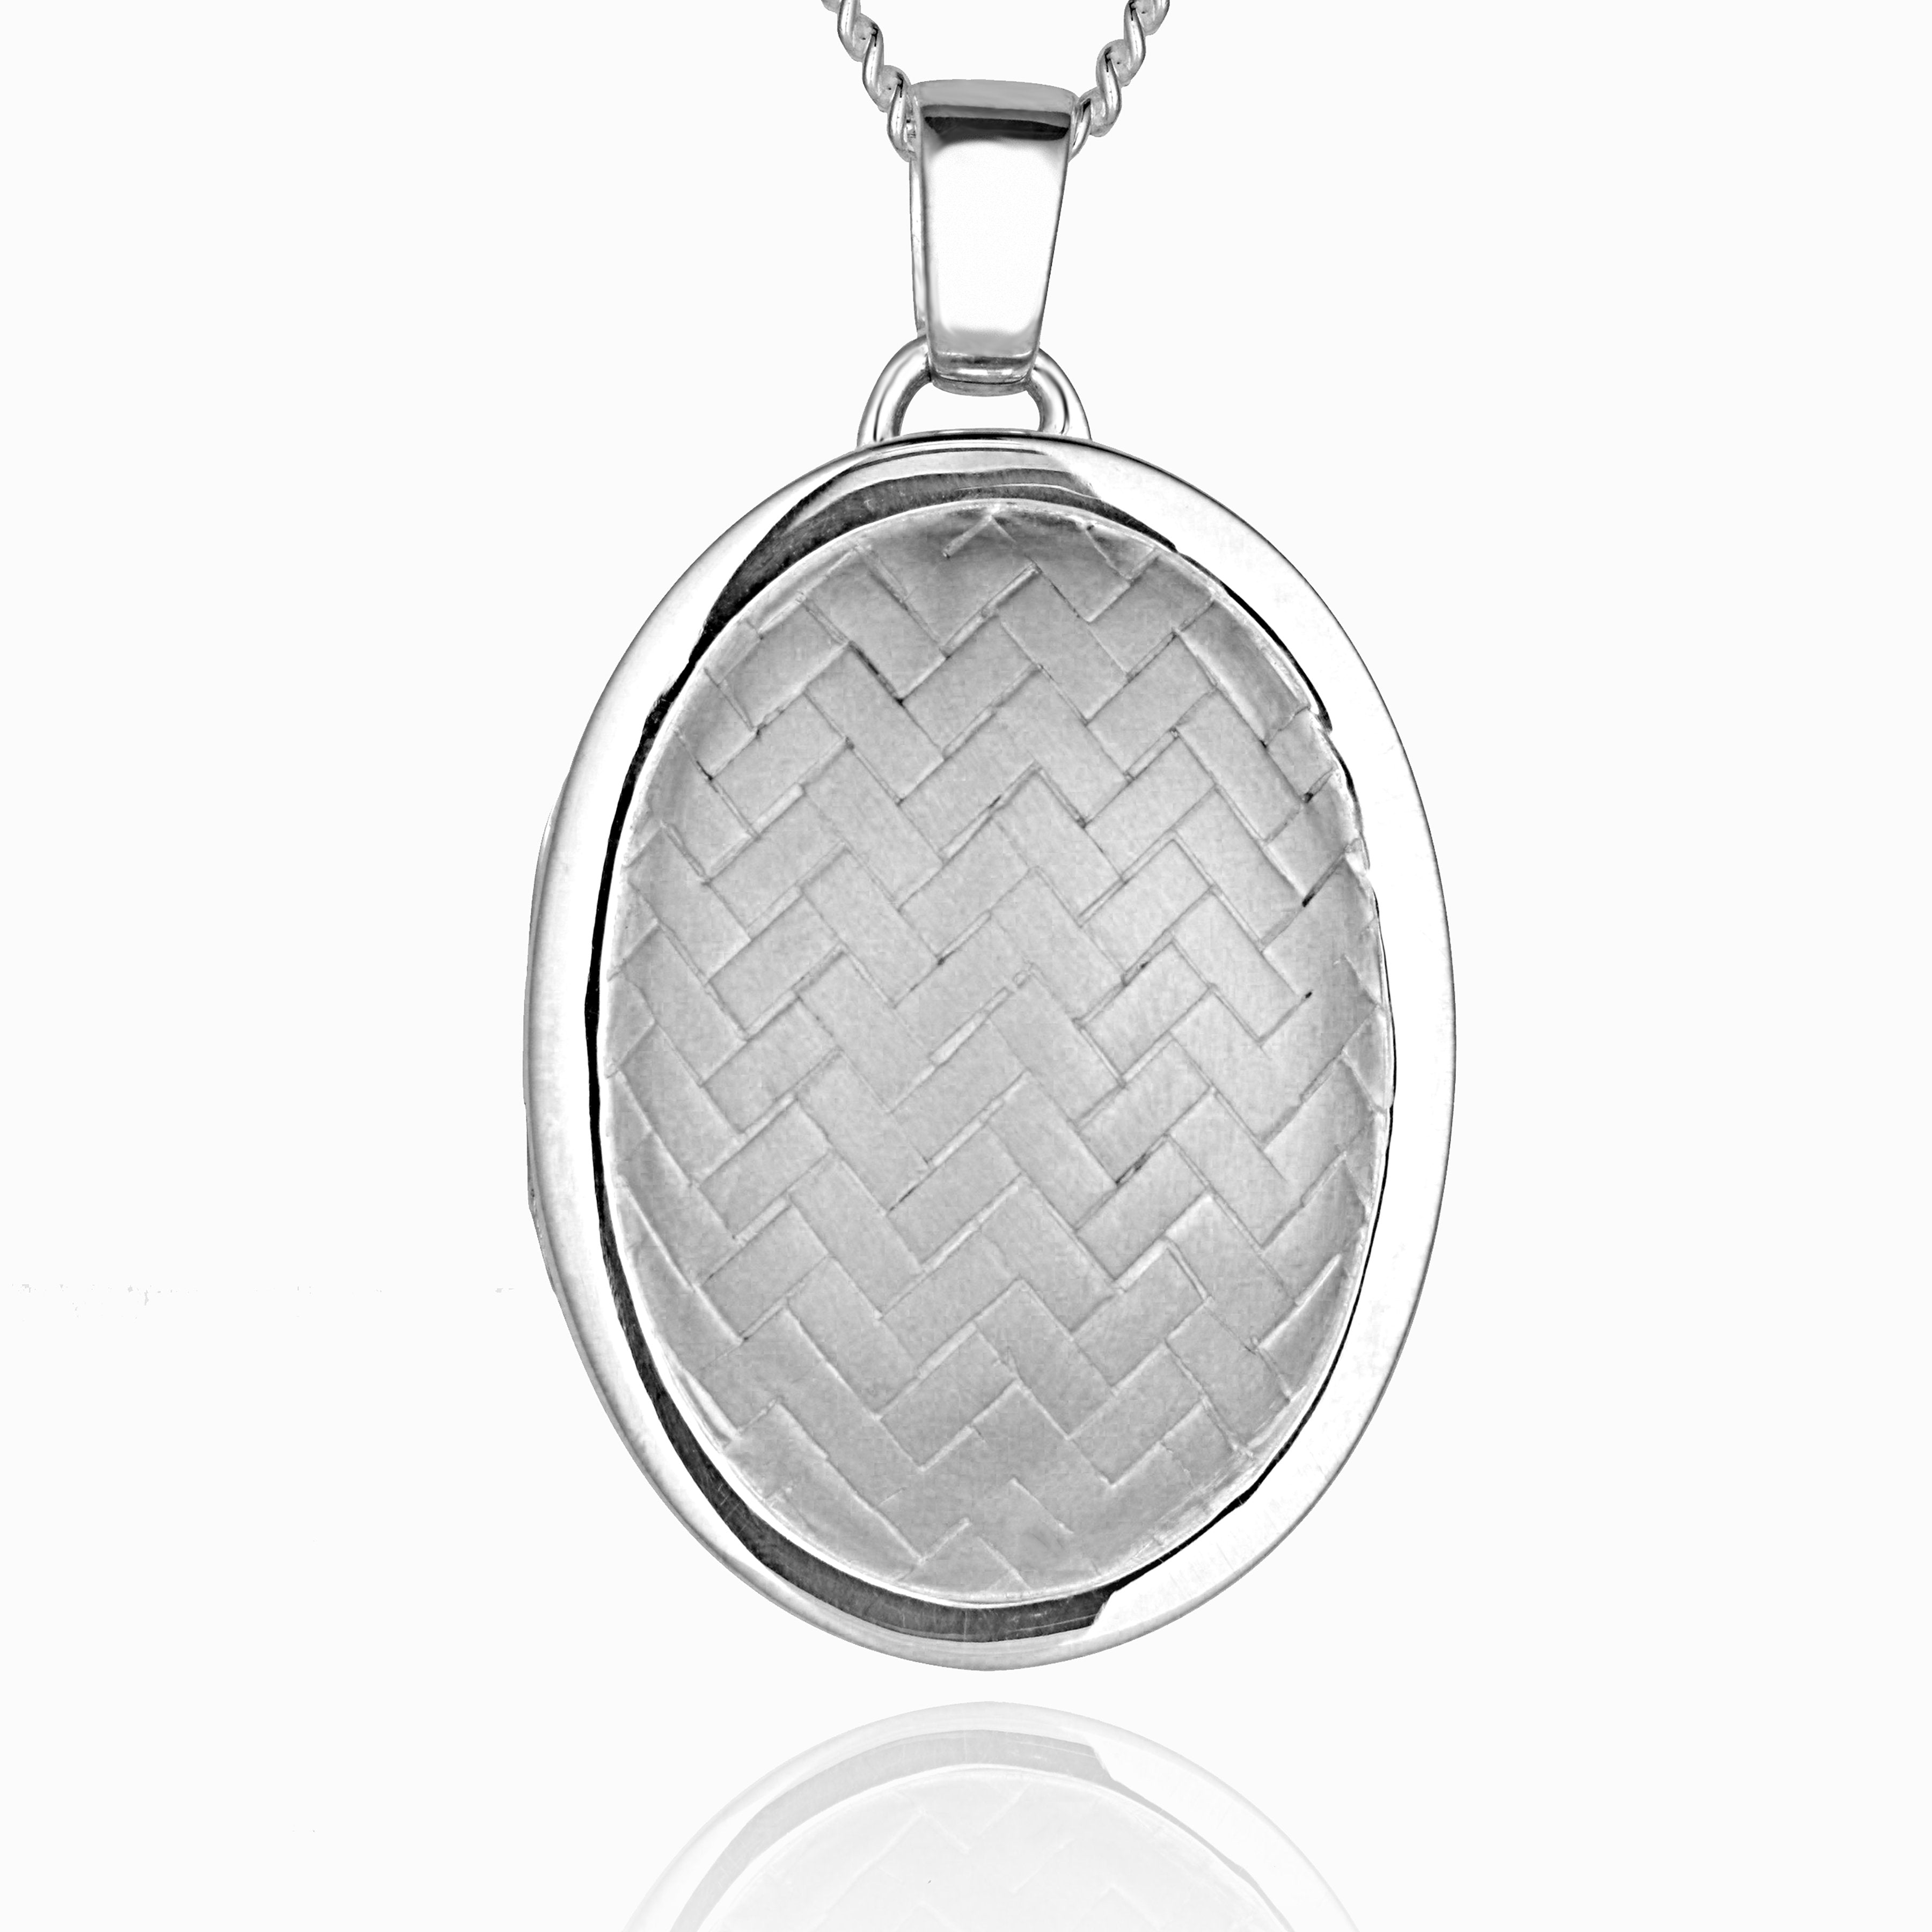 sterling silver oval locket with a herringbone design on the front, on a sterling silver curb chain